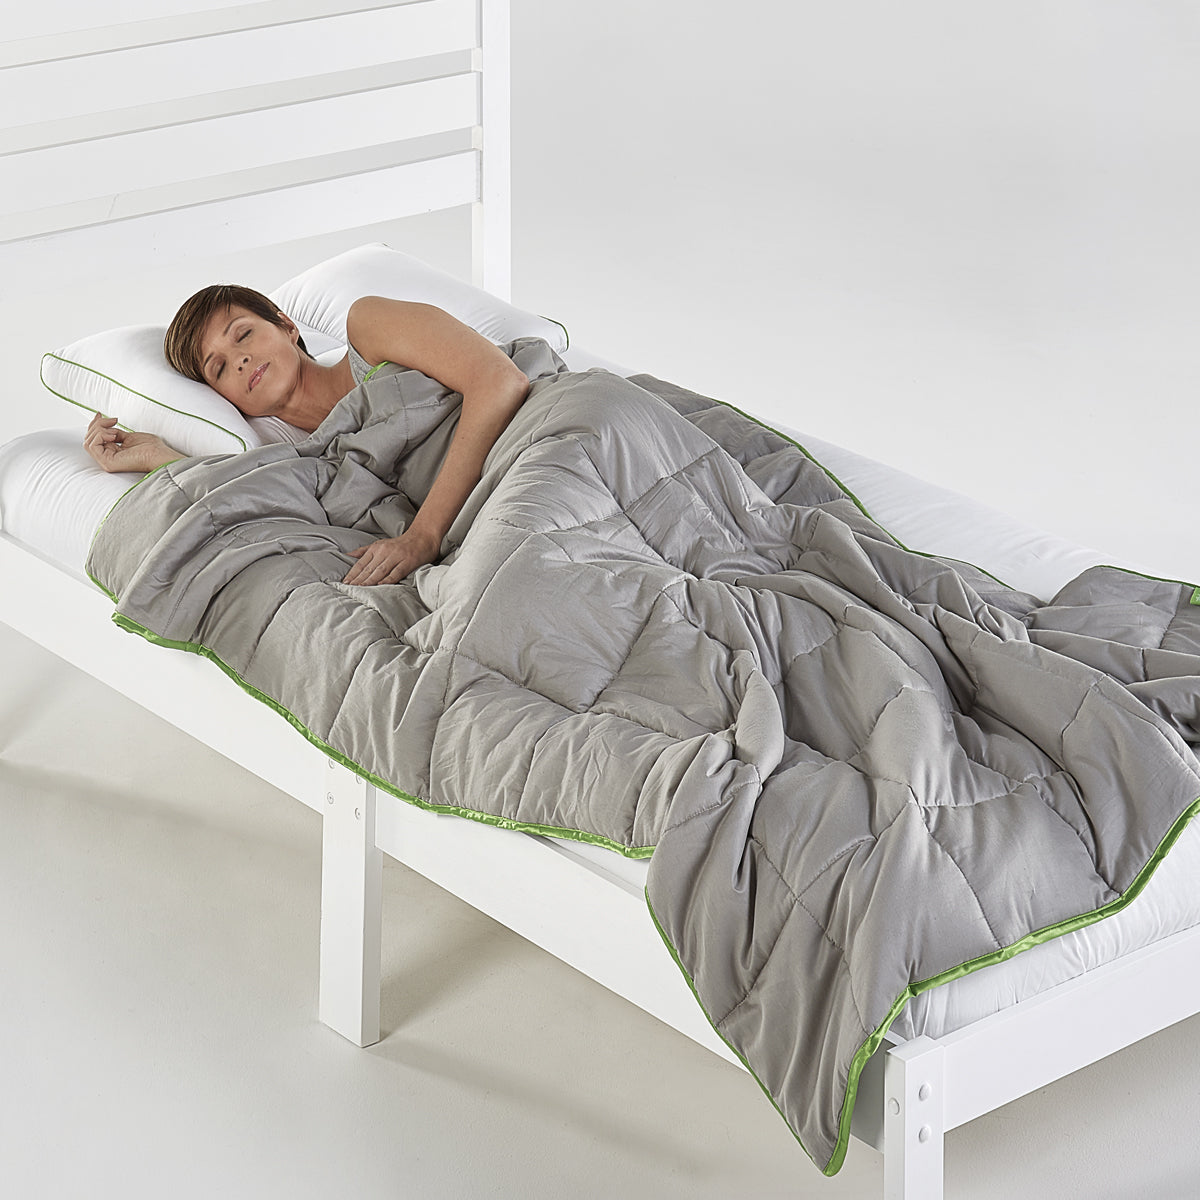 Kӧlbs Side Wedge Pillow for Sleeping